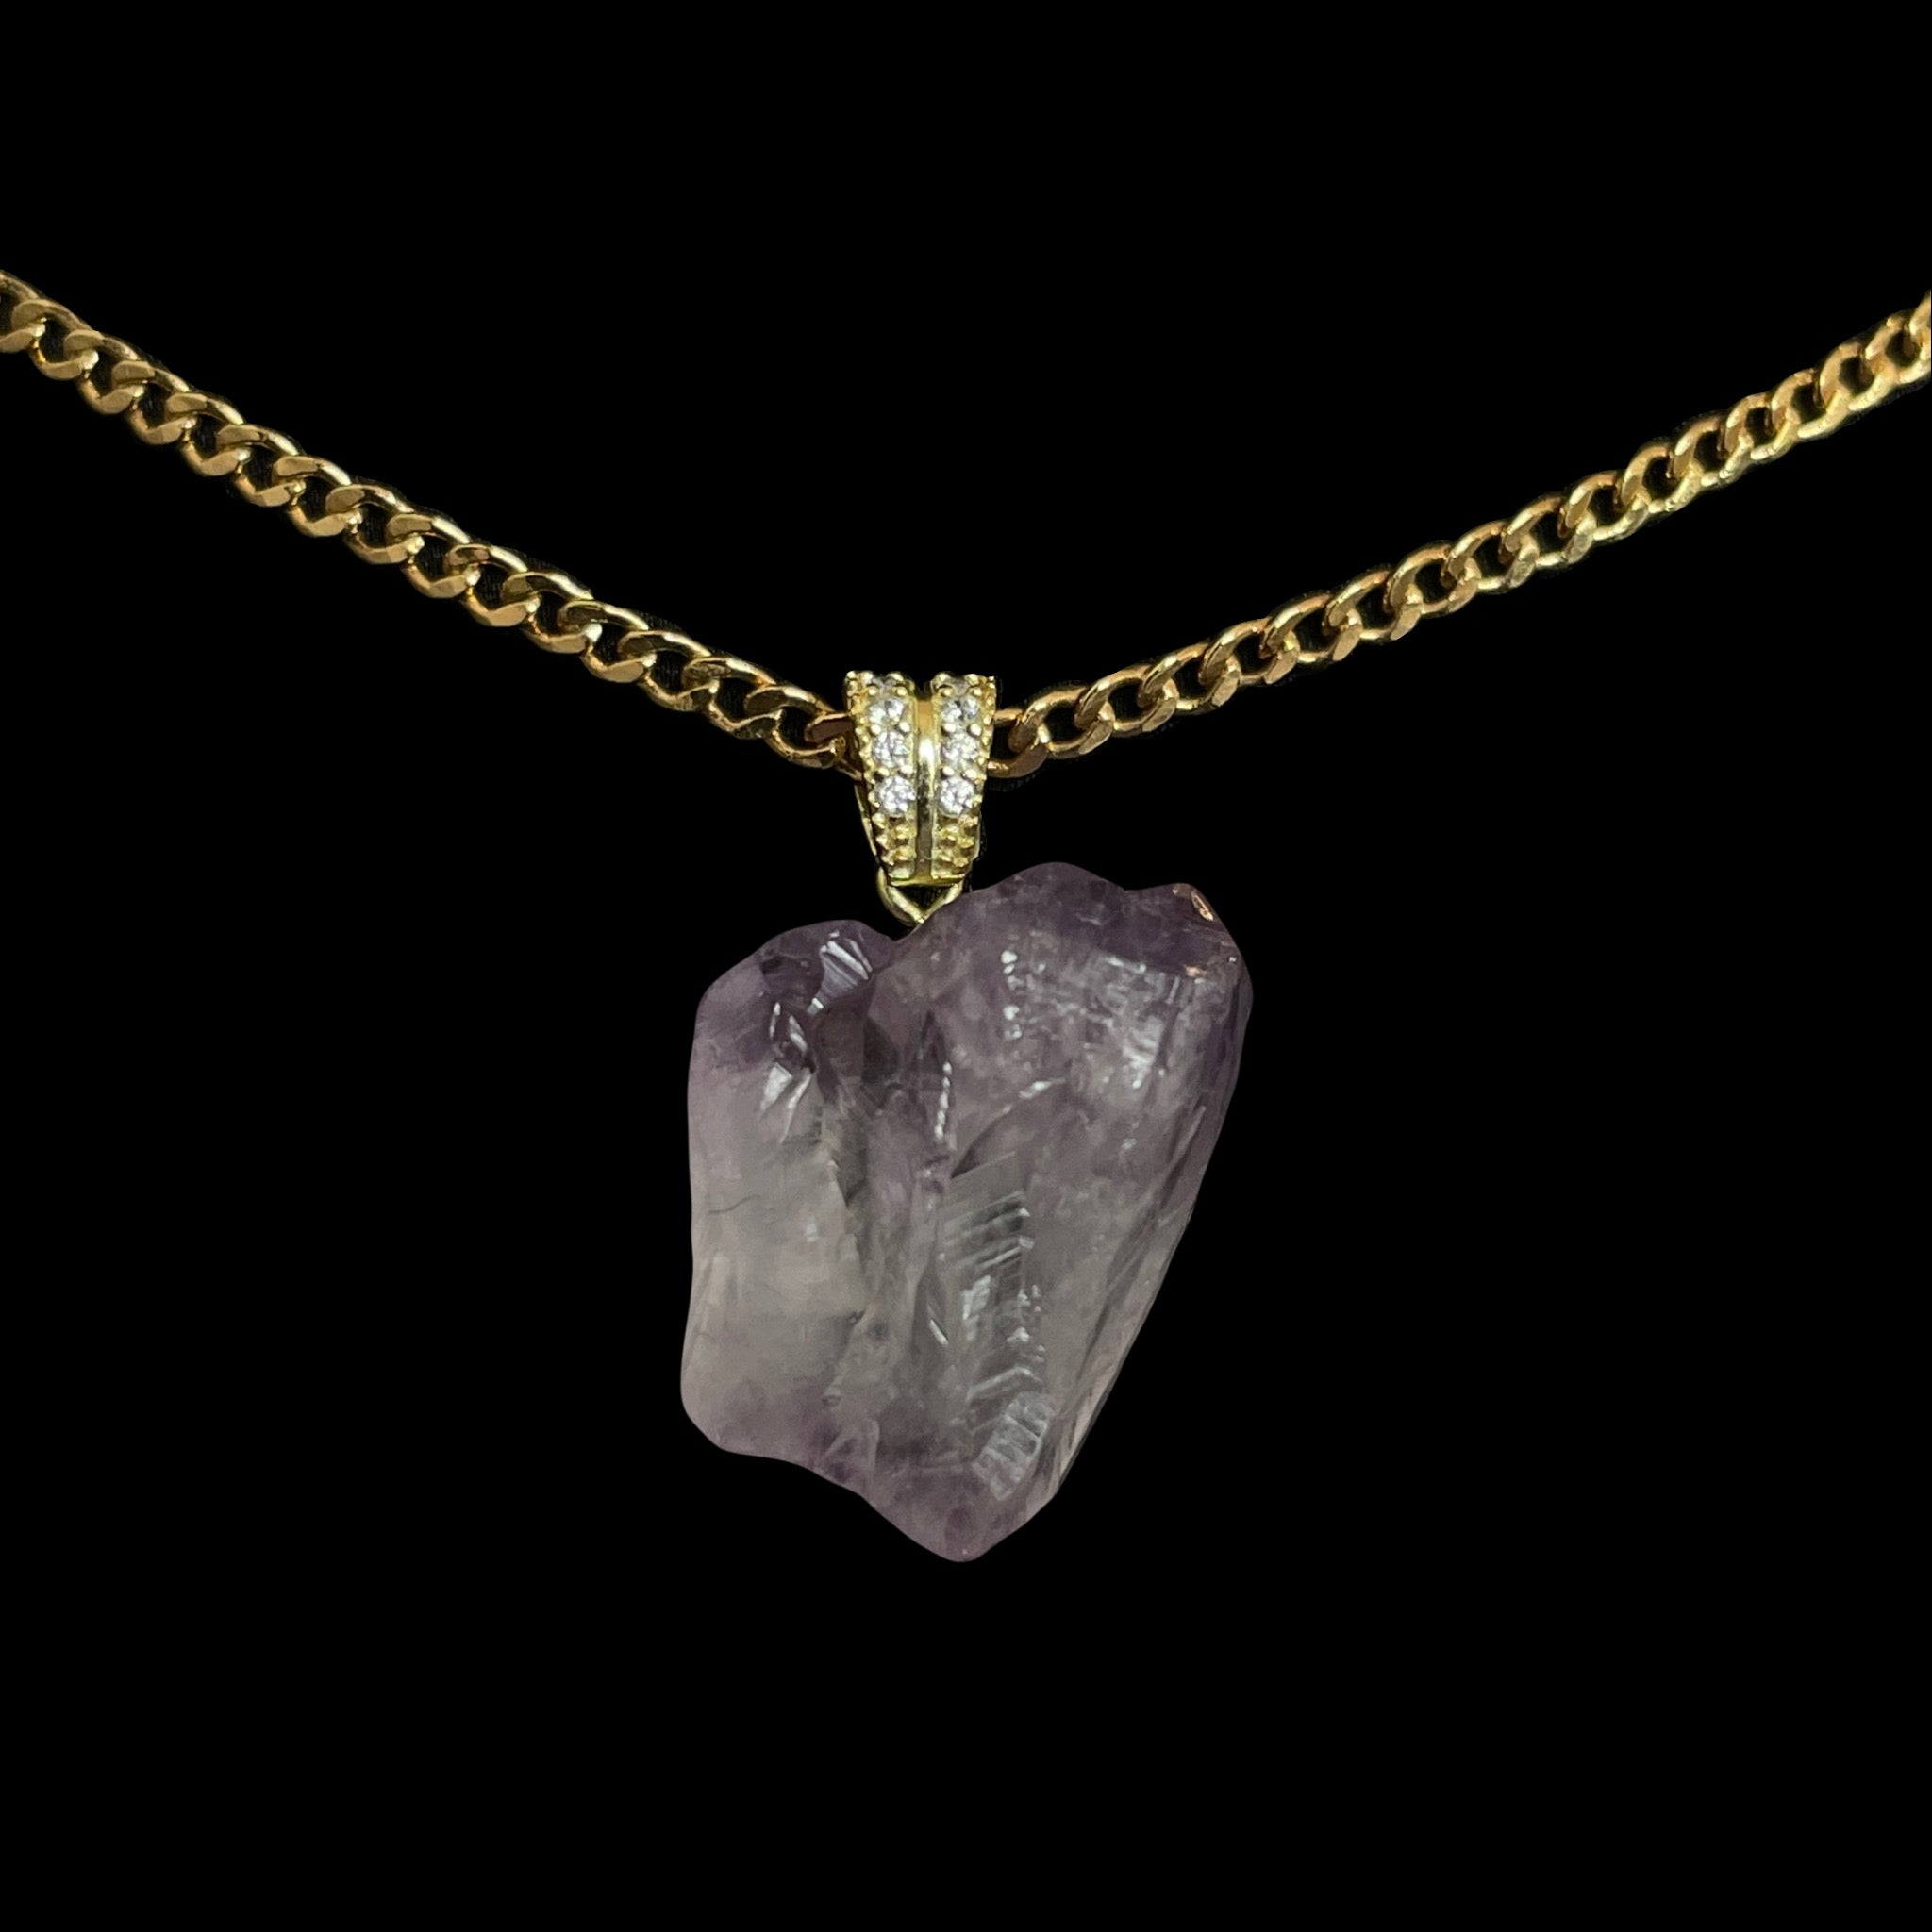 Amethyst, 18k Gold Filled, Cuban Chain Necklace